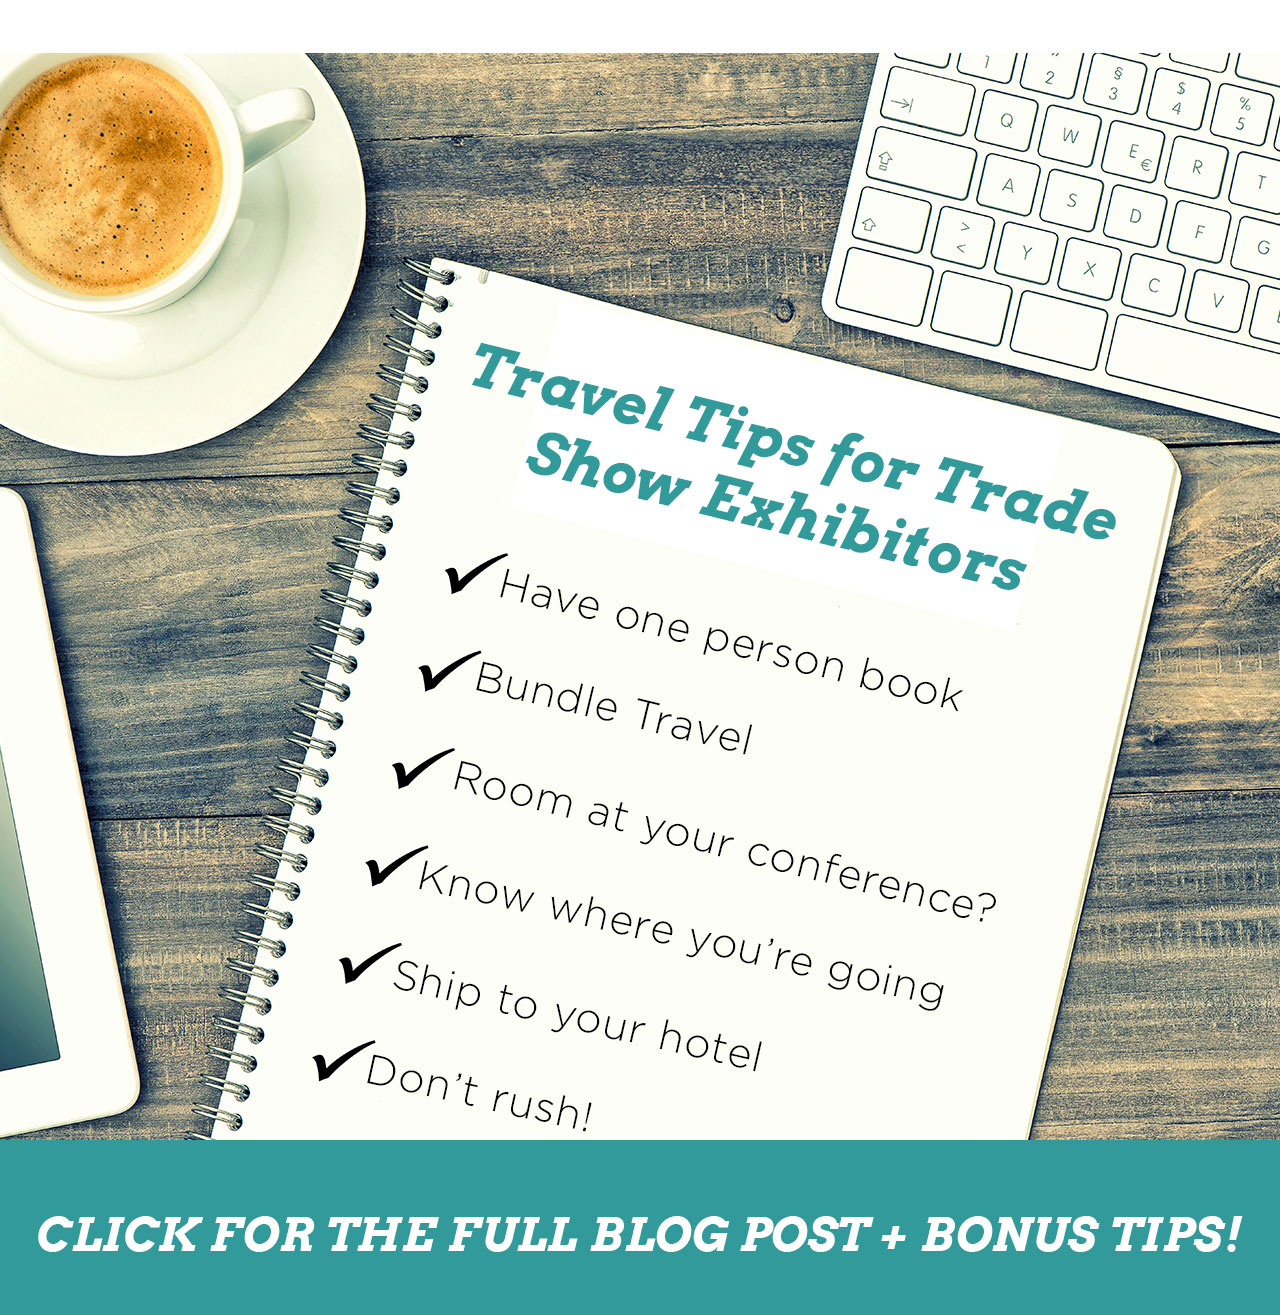 Travel Tips for Trade Show Exhibitors